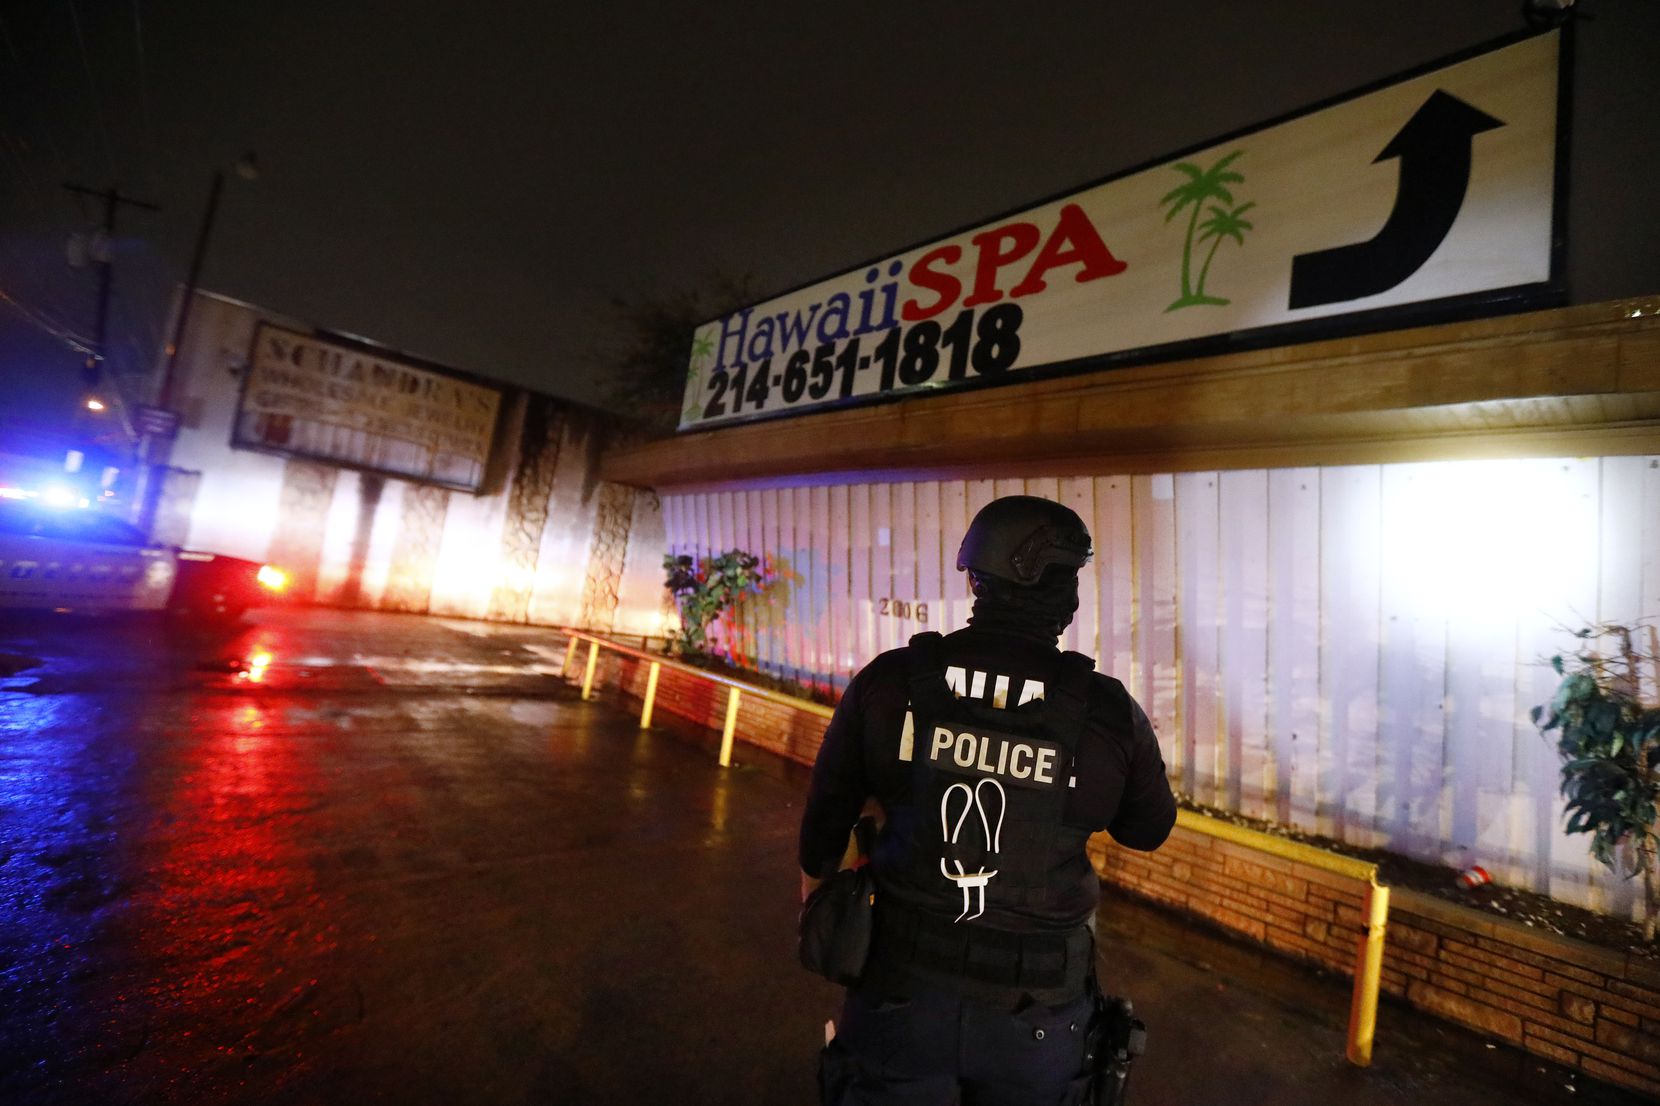 A Dallas Police vice officer inspects the outside of Jade Spa, until last week's raid one of the longest-running illicit massage parlors in Dallas.